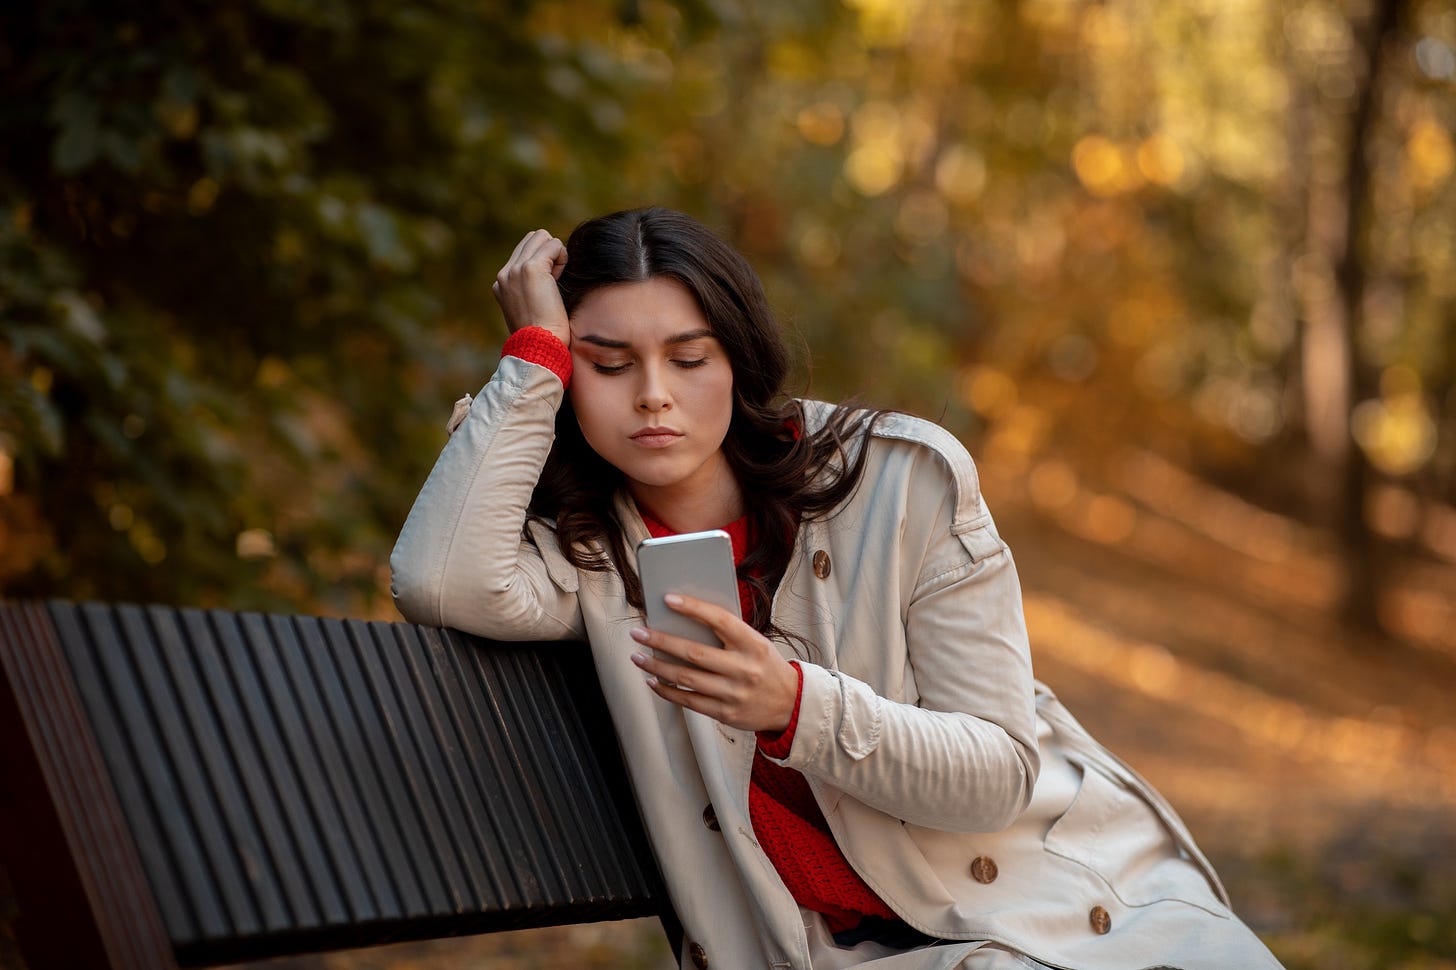 A woman sits on a bench in autumn and grimaces at her phone with a disappointed look.